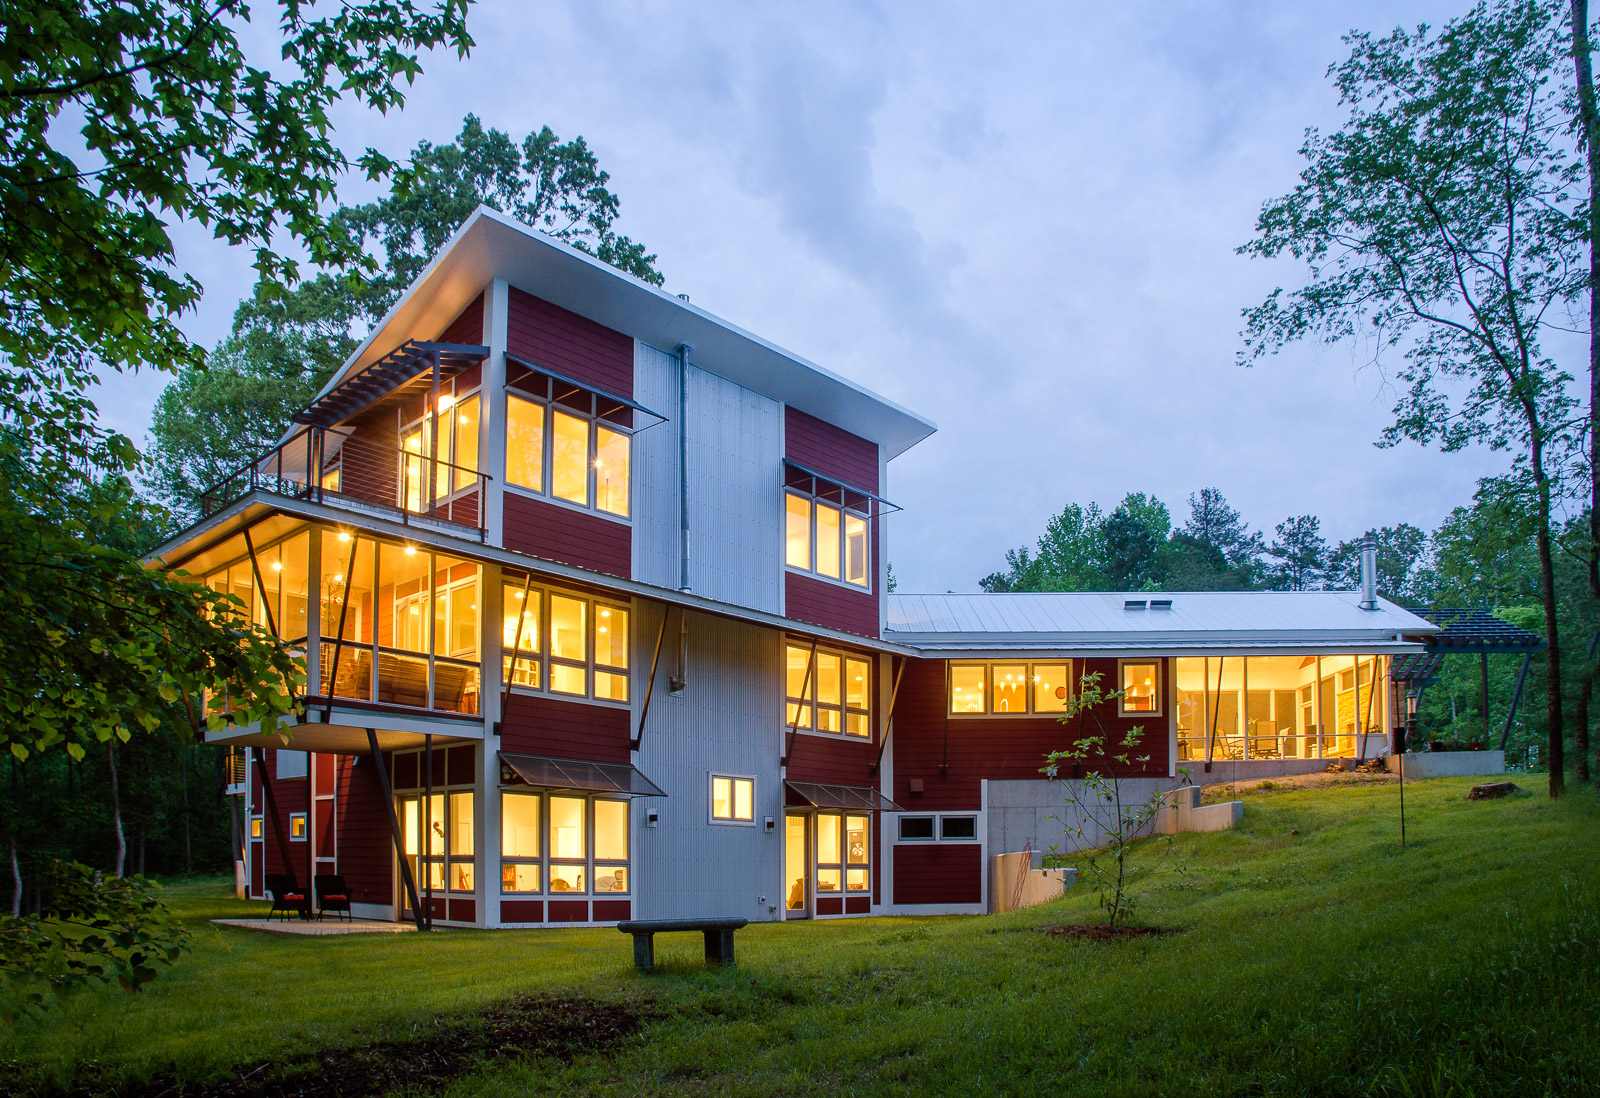 Contemporary house with distinct one story and three story volumes. Large windows wrap the house creating unique elevations with shading elements, a cantilevered porch and metal siding and roof.